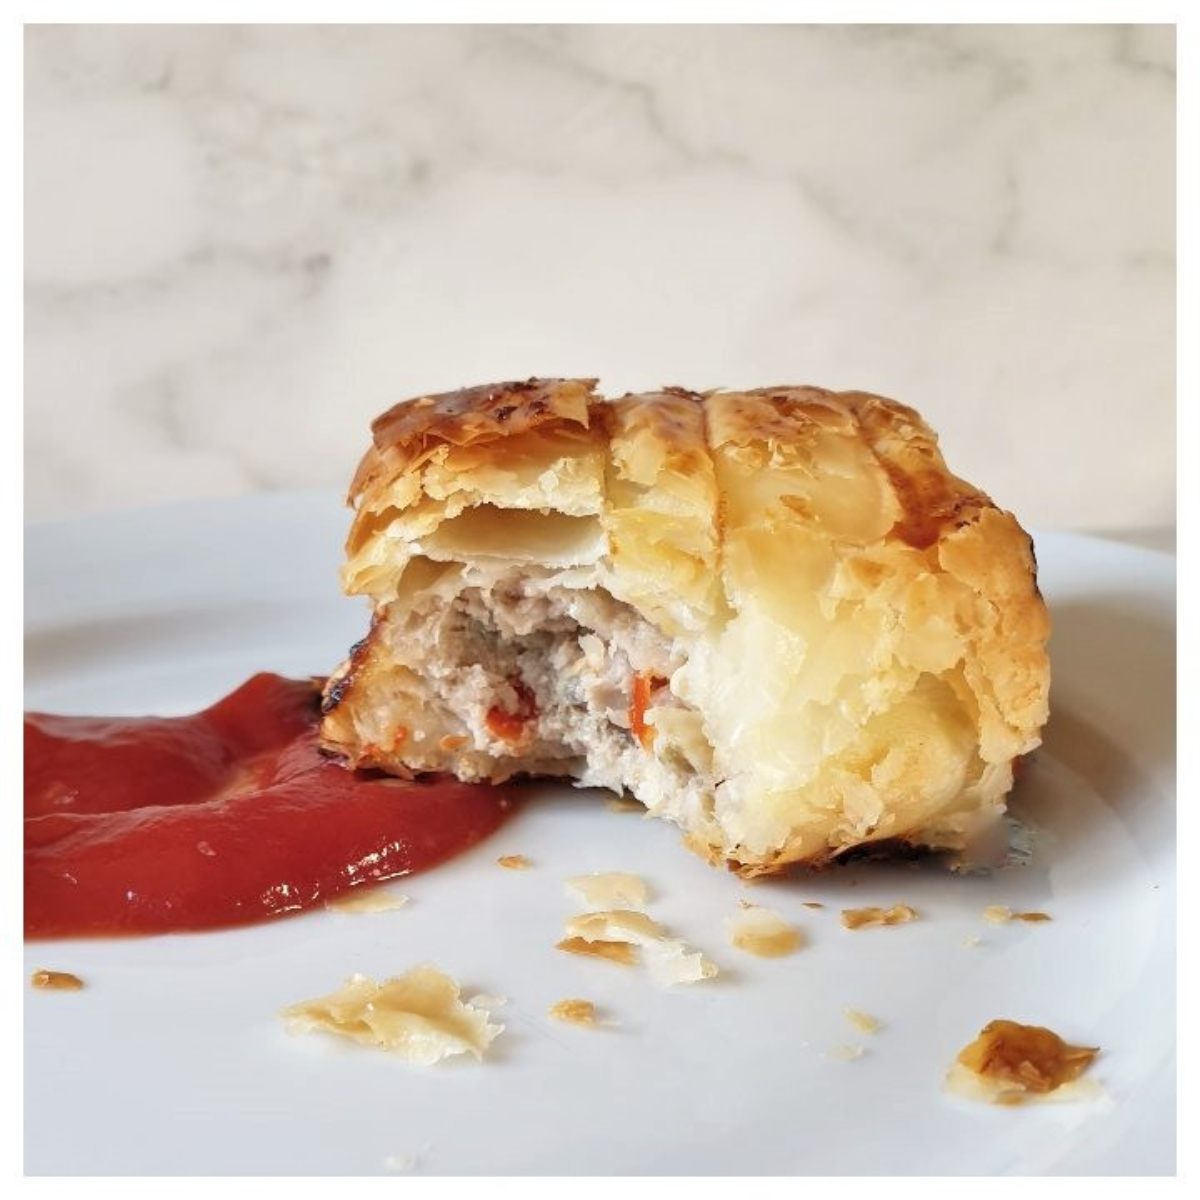 A pork and apple sausage roll on a plate with tomato ketchup.